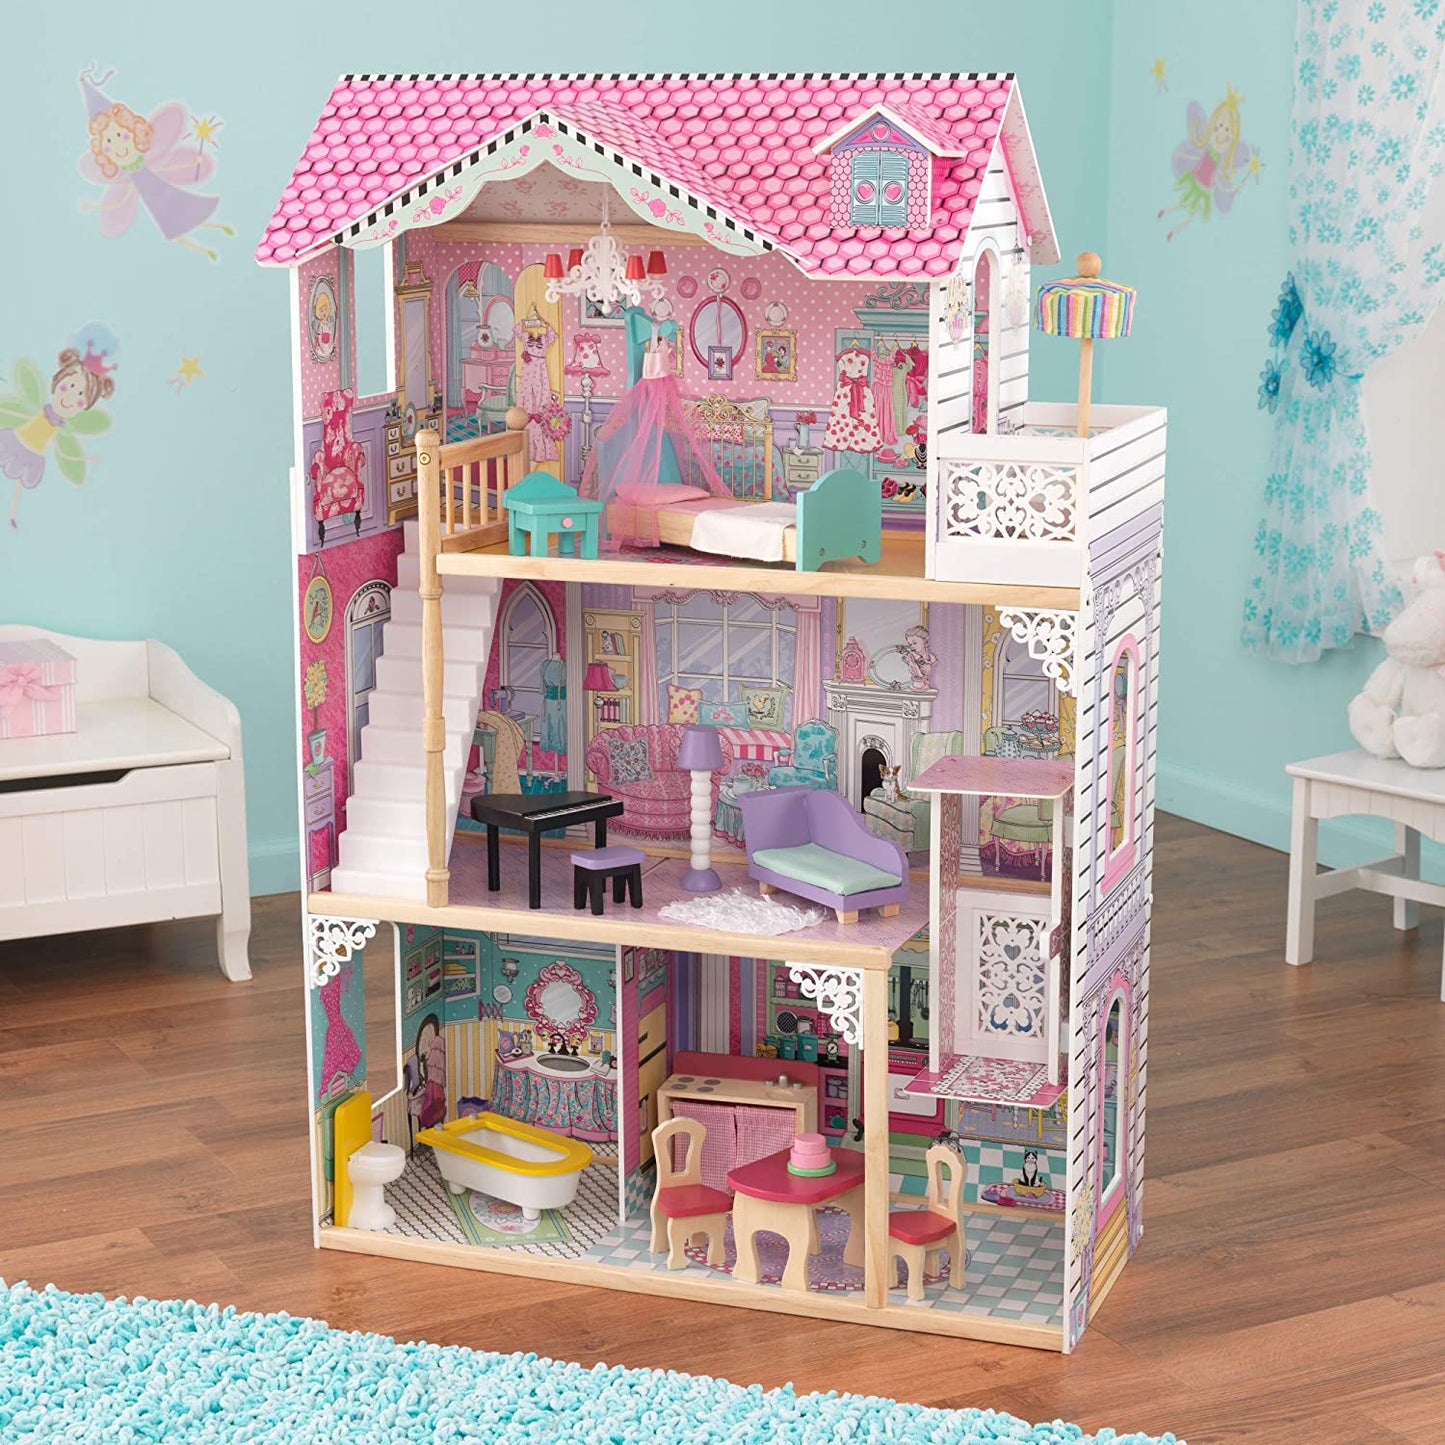 Dollhouse with Furniture for kids 120 x 88 x 40 cm (Model 3) - image2